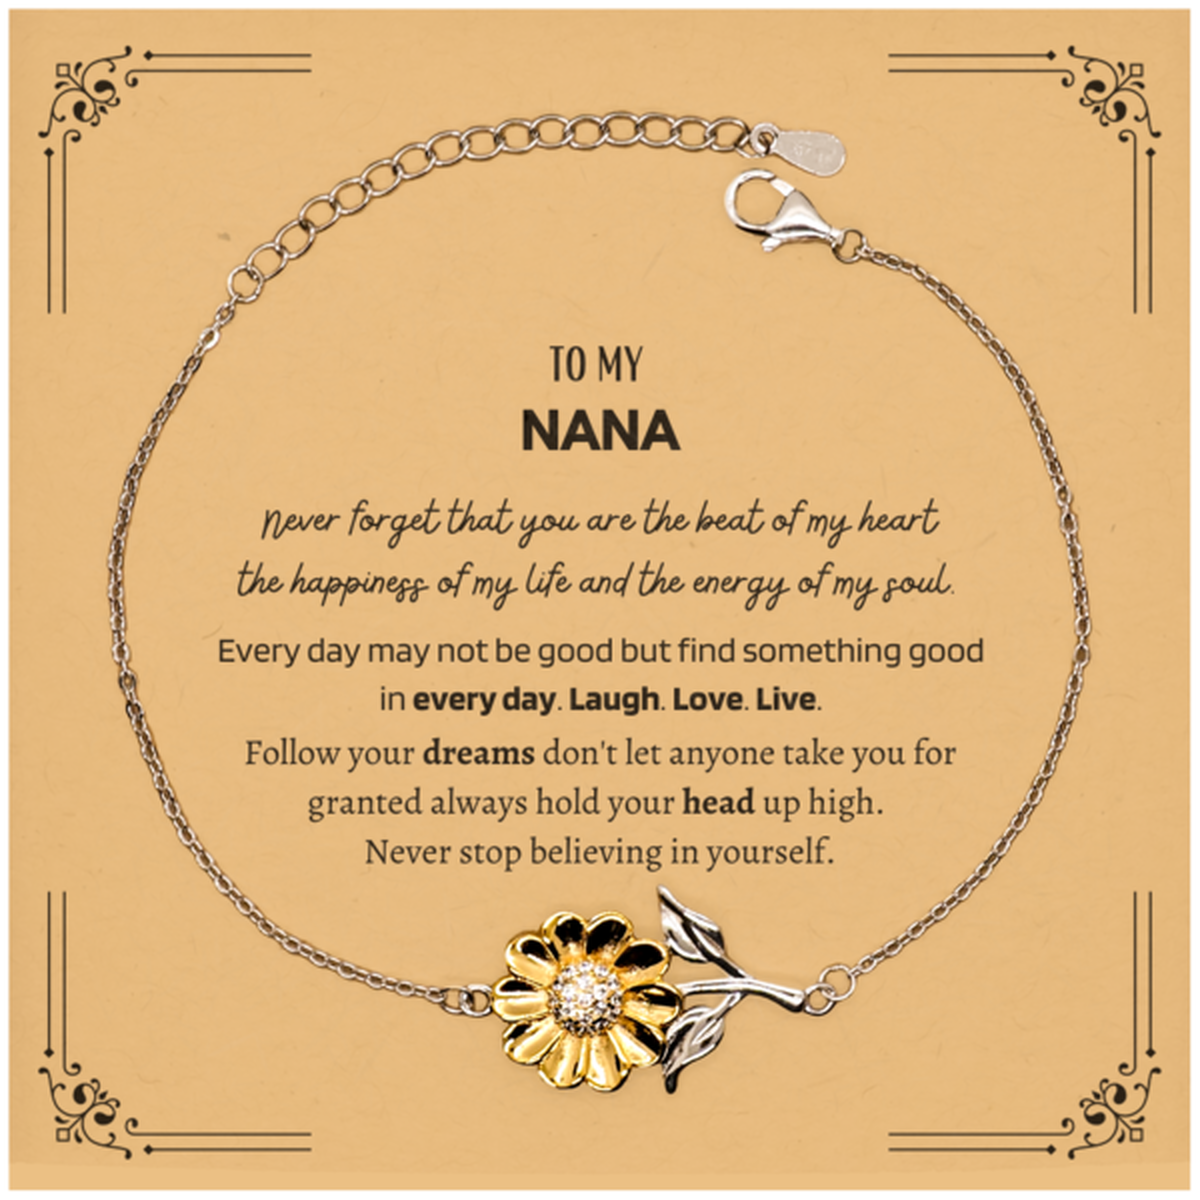 To My Nana Message Card Gifts, Christmas Nana Sunflower Bracelet Present, Birthday Unique Motivational For Nana, To My Nana Never forget that you are the beat of my heart the happiness of my life and the energy of my soul